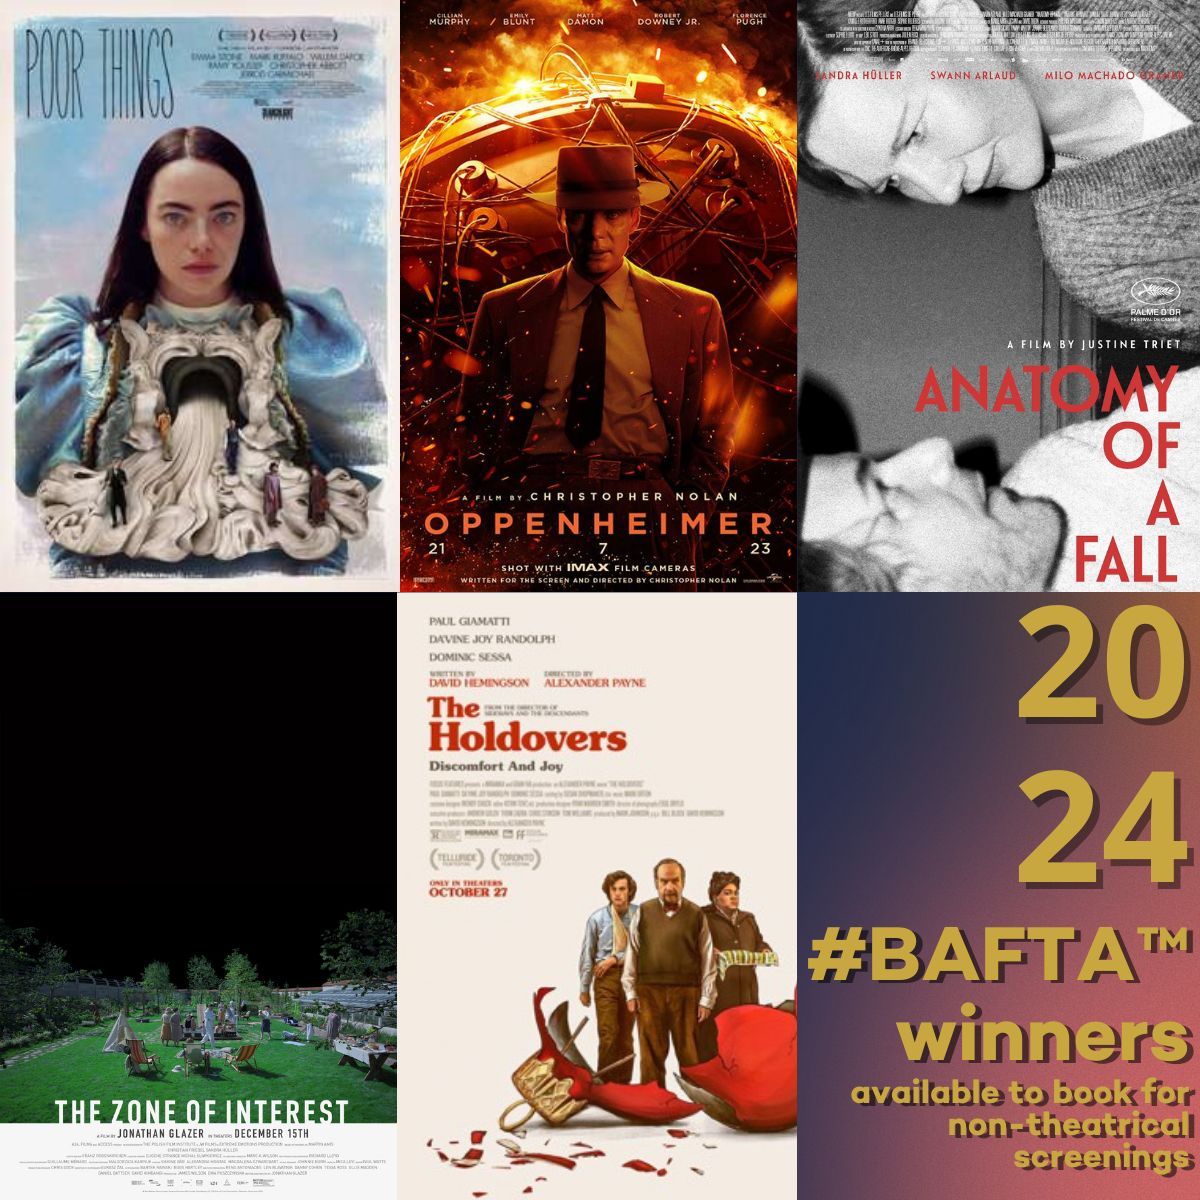 Congratulations to all the @Bafta winners - what an evening it was! Celebrate these award-winning movies by scheduling them into your programme today. Book your films here: buff.ly/3AH6REJ #Baftas2024 #filmscreening #films #awardwinners #nontheatrical